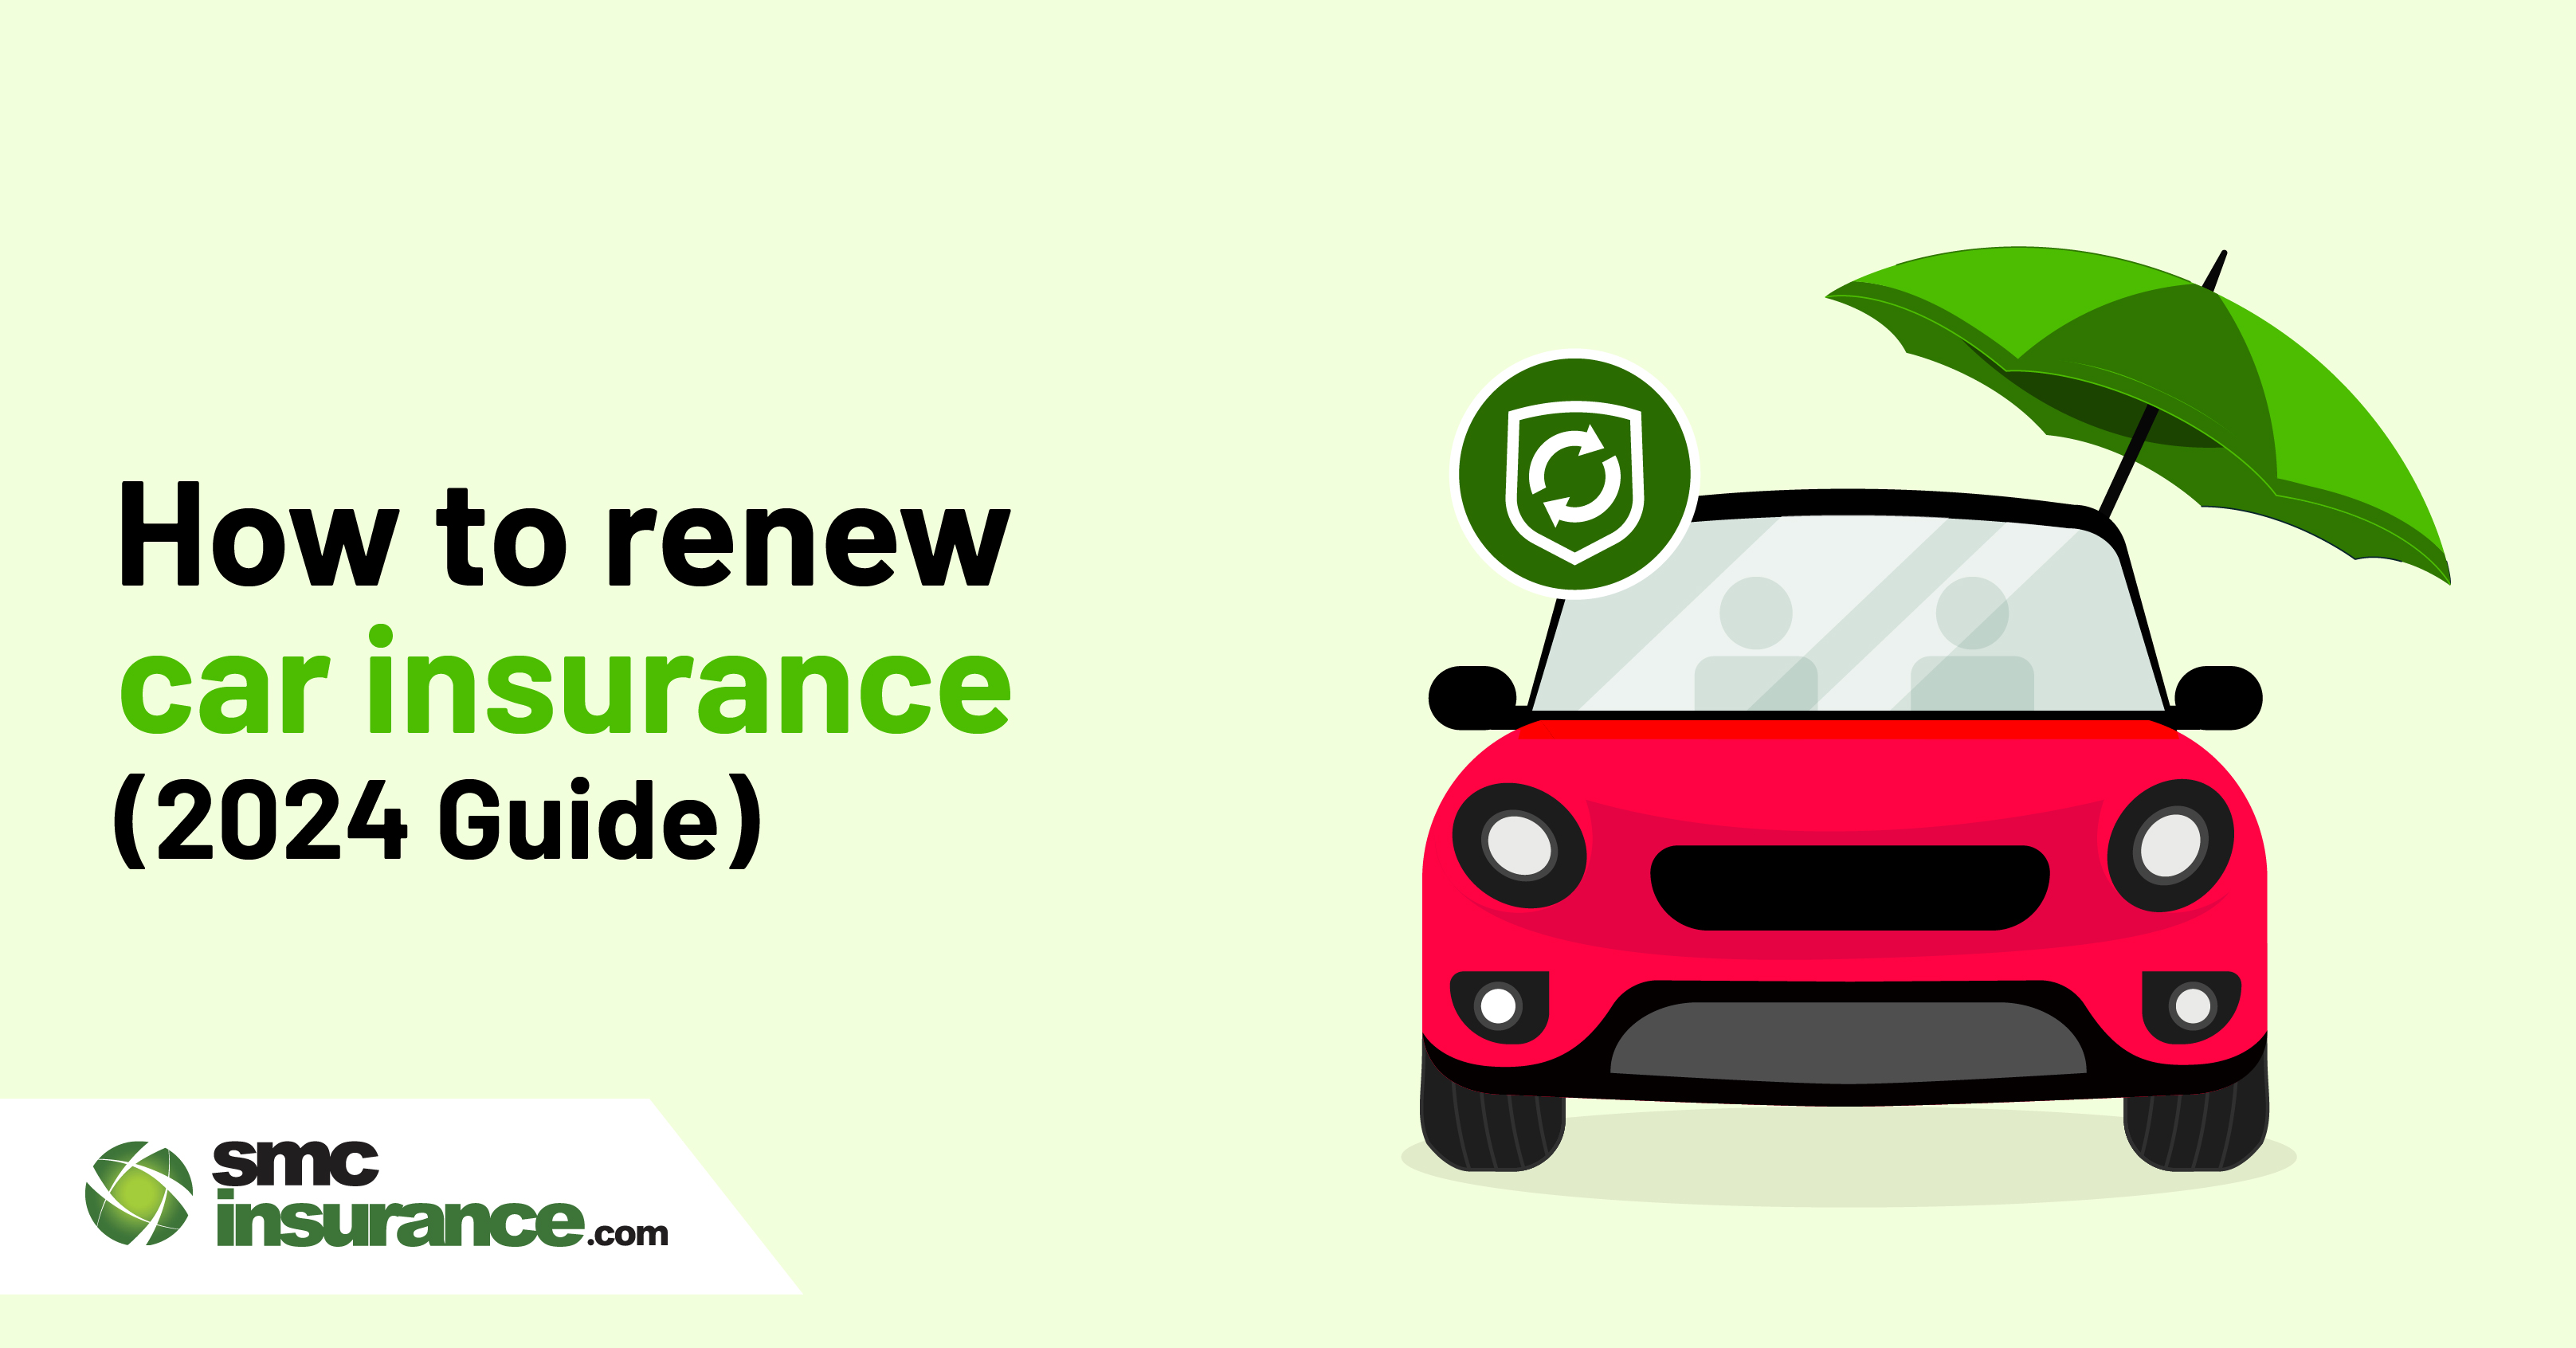 How To Renew Car Insurance?